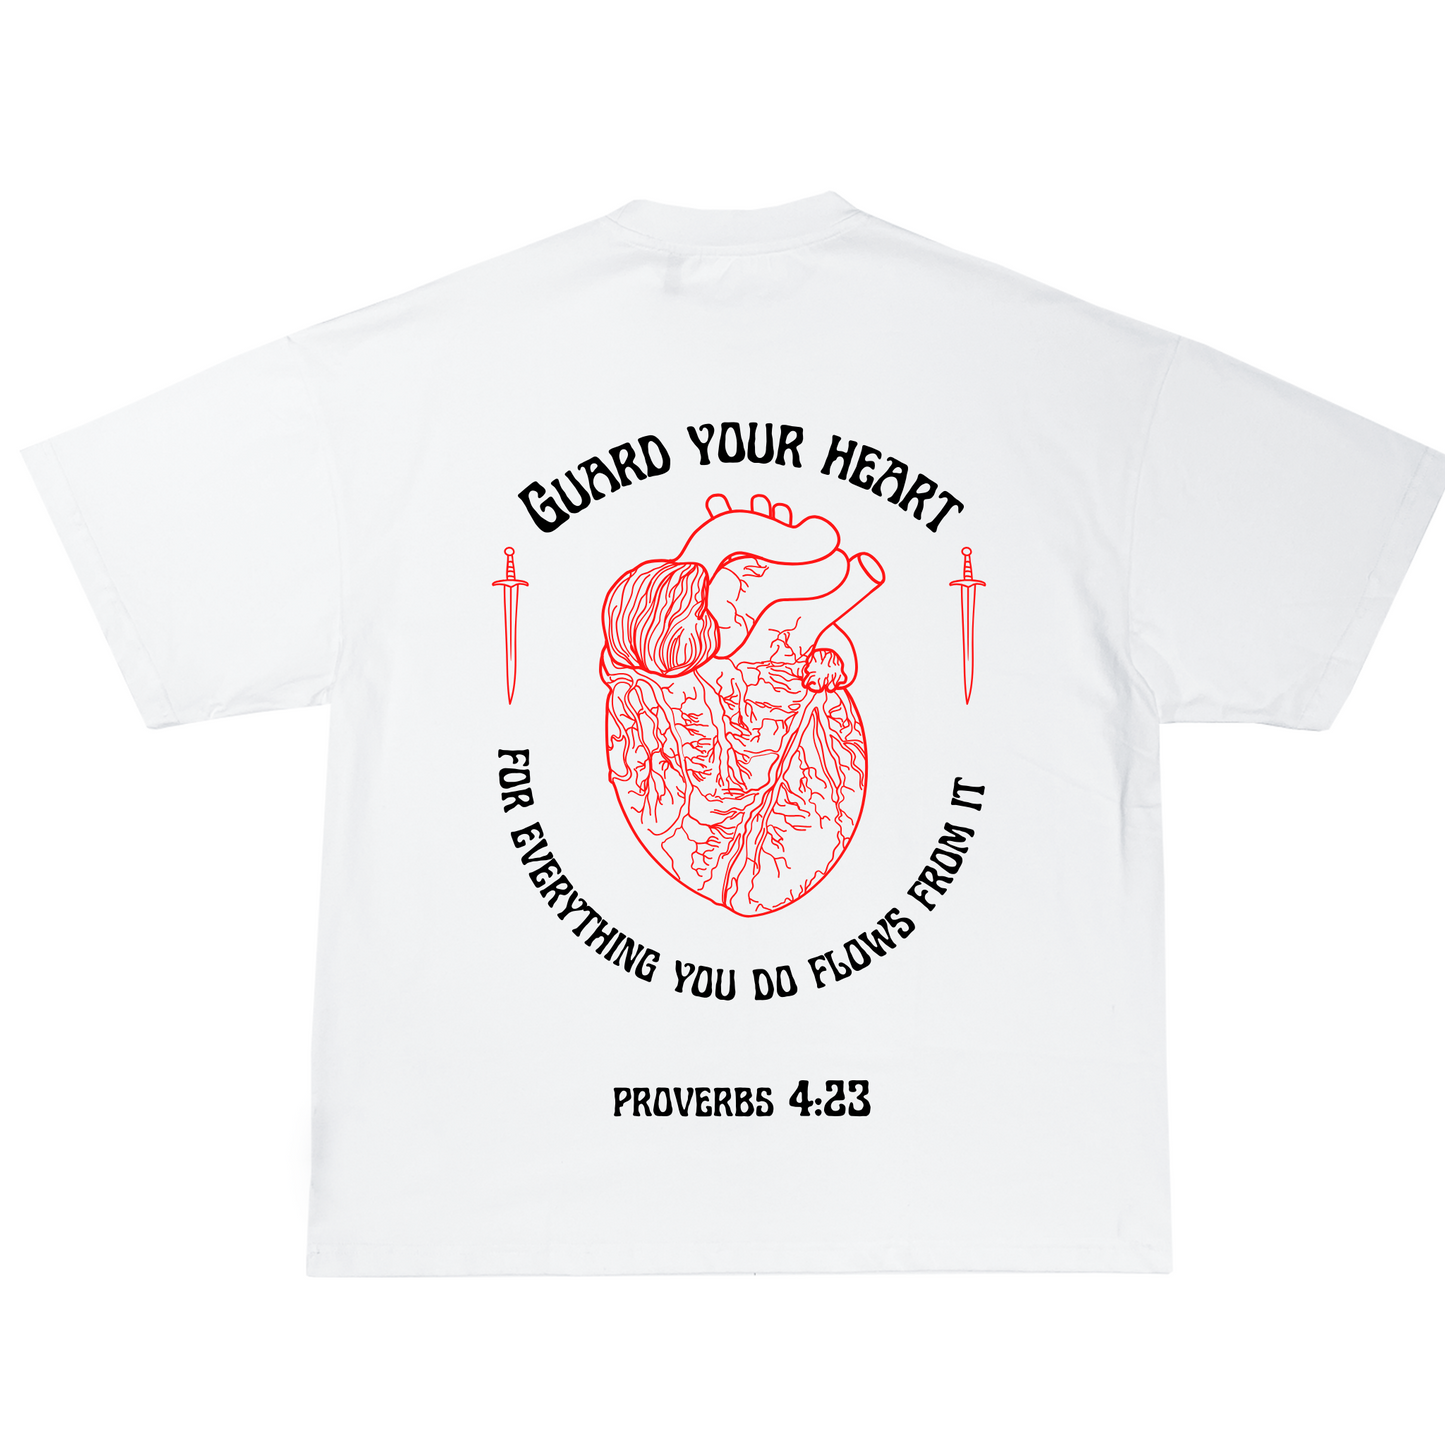 Guard Your Heart for everything you do flows from it white heavyweight T-Shirt. Proverbs 4:23 T-Shirt. Guard Your Heart white T-shirt by Crown of Favor Christian Clothing Brand. Faith Based Clothing Brand. Authentic Christian Streetwear. Jesus inspired Clothing brand. Crown of Favor Proverbs 4:23 white T-shirt. Crown of Favor